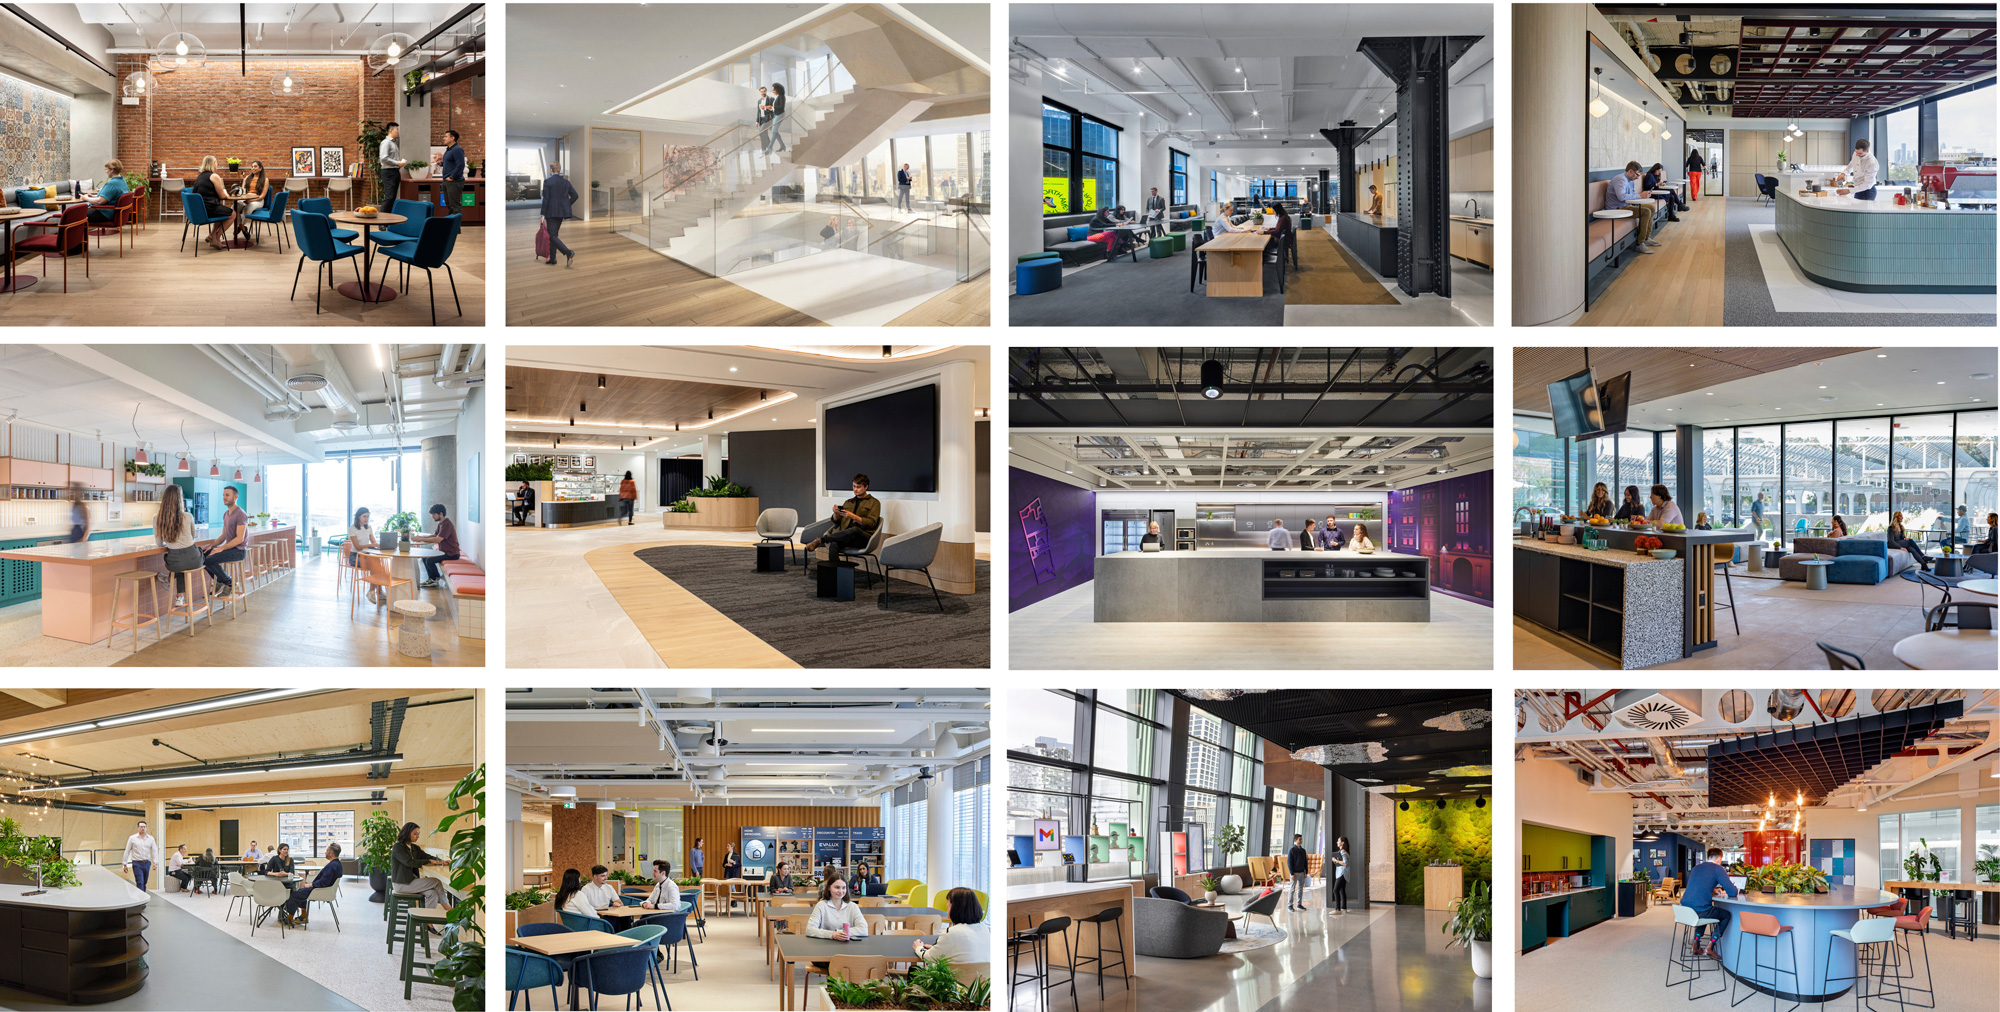 A collage of 12 different modern office interiors, showcasing diverse design styles. Each section displays unique aesthetic elements ranging from exposed brick walls and contemporary furniture to minimalist decor and sophisticated communal spaces. The offices are designed to enhance natural lighting and encourage collaborative work environments, featuring a blend of casual seating areas, formal meeting spaces, and integrated technology.